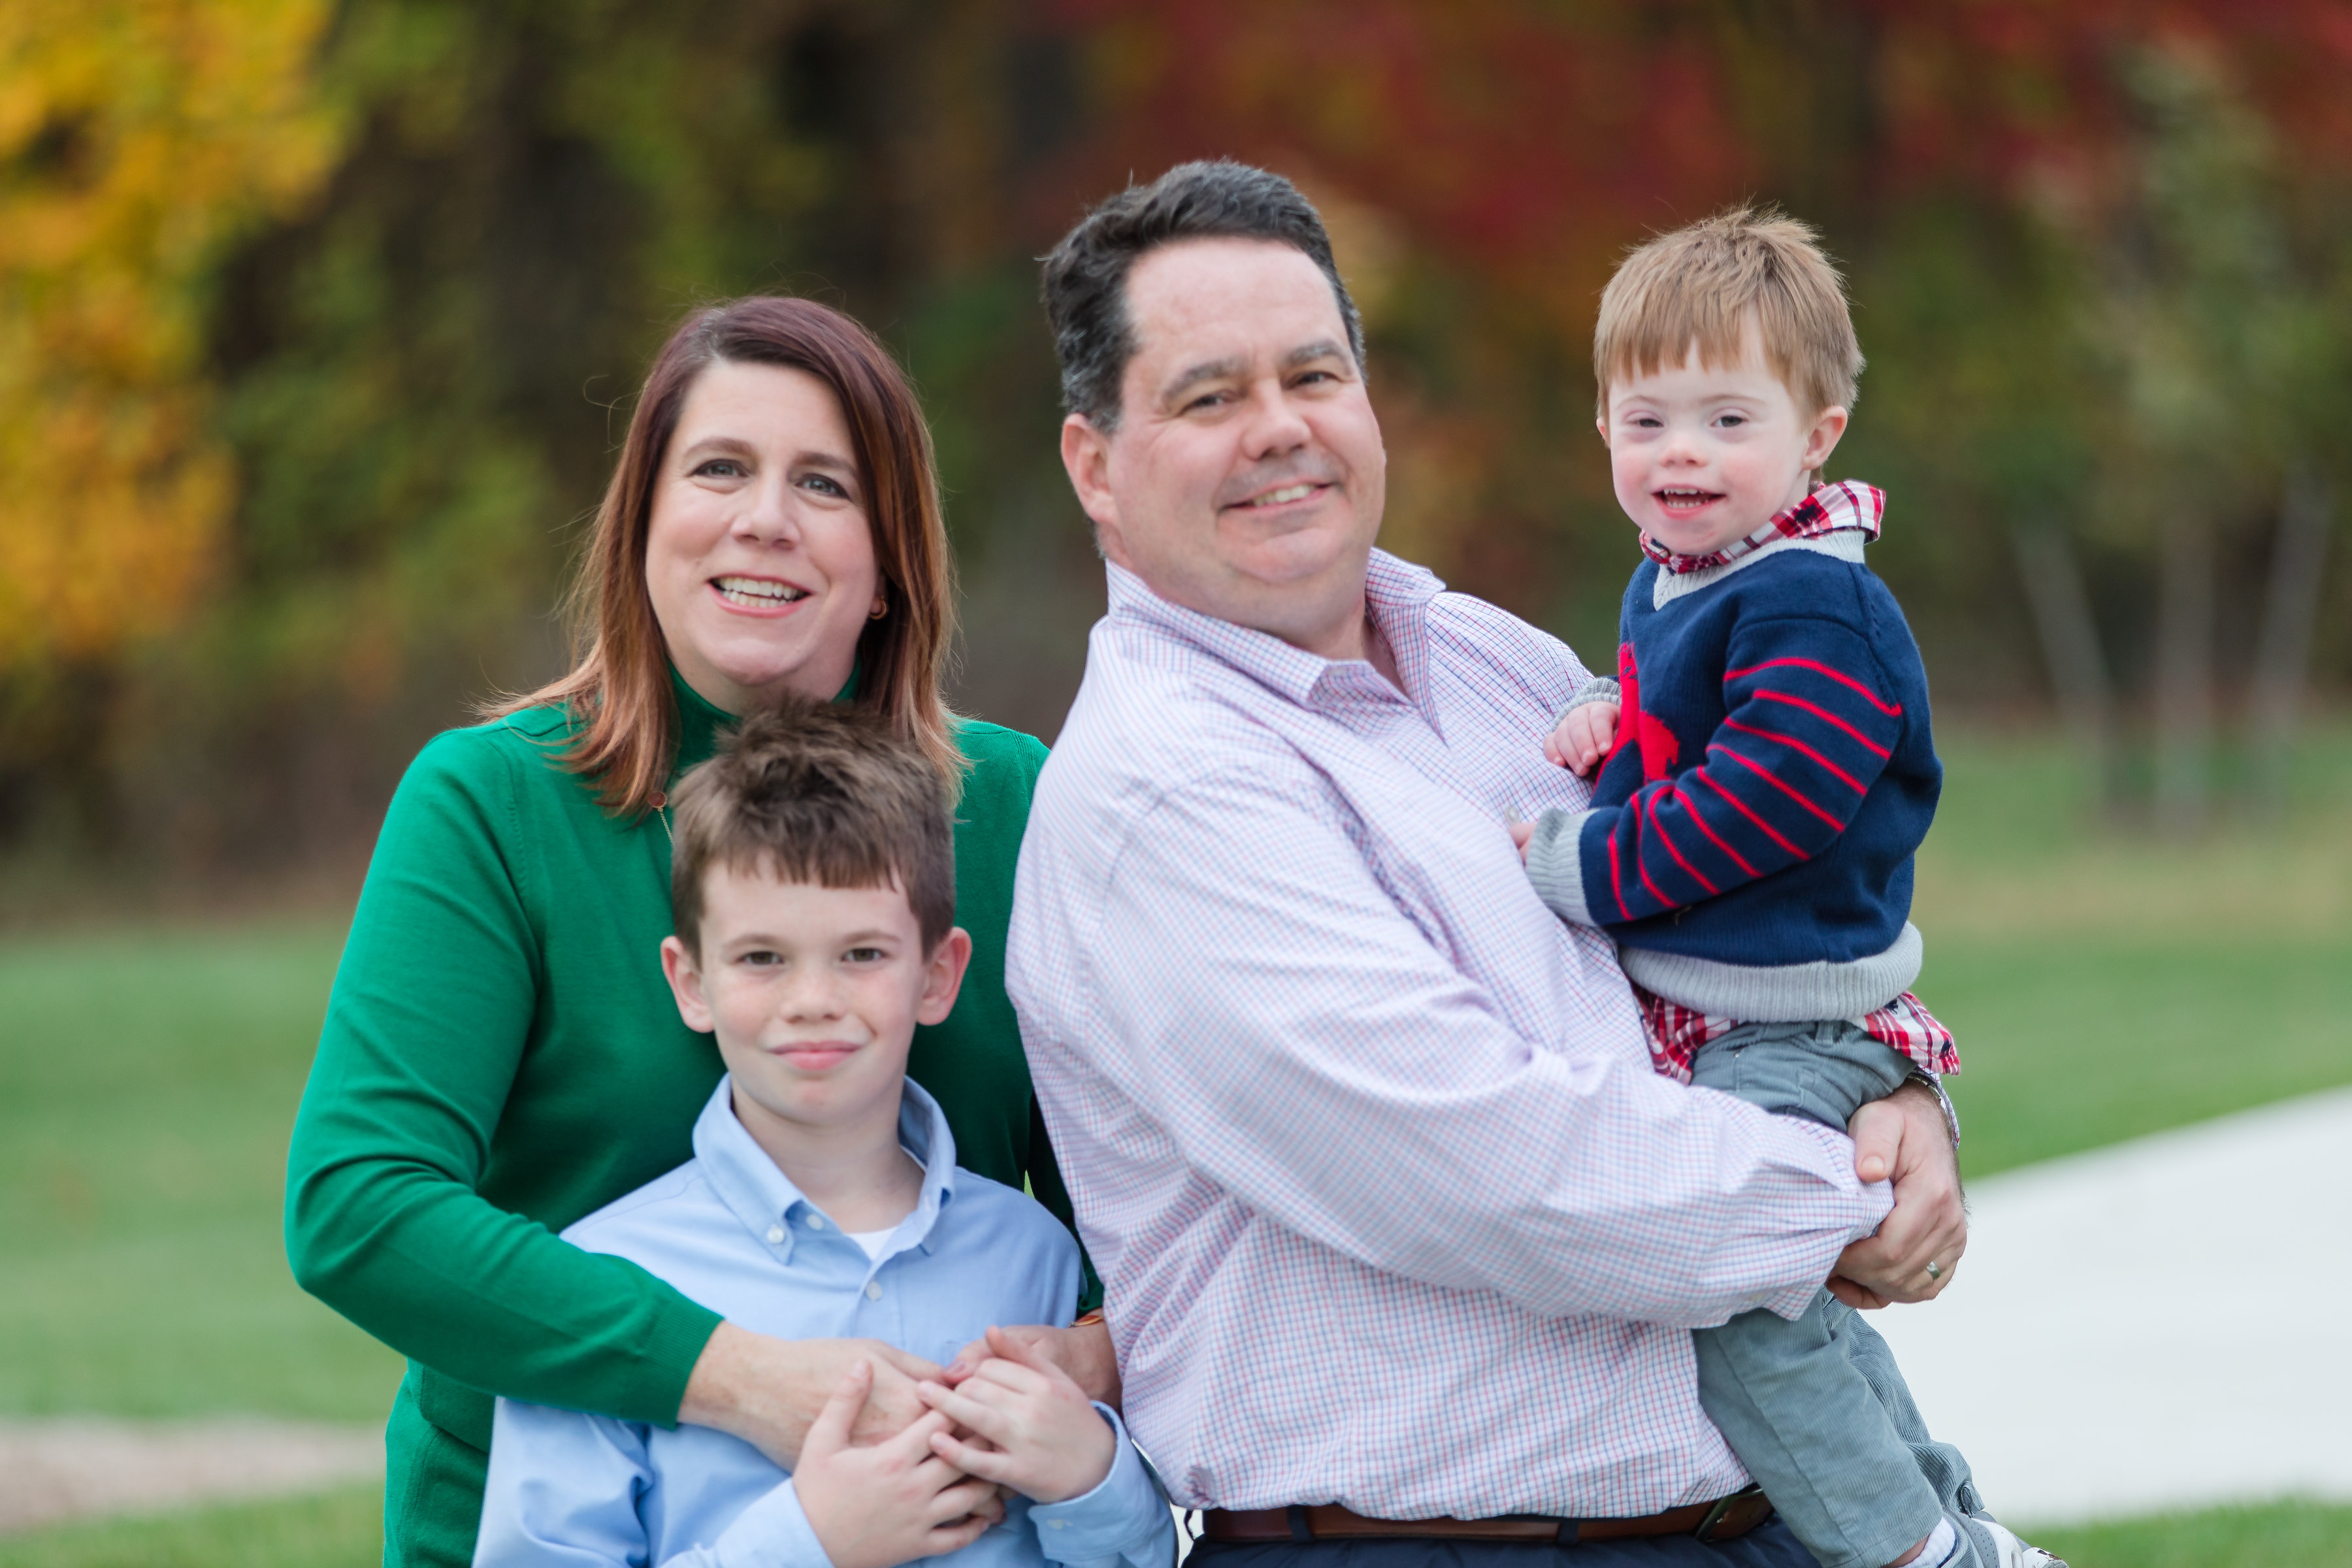 Krista Griffith, candidate for State Representative for the 12th District of Delaware, with her family.